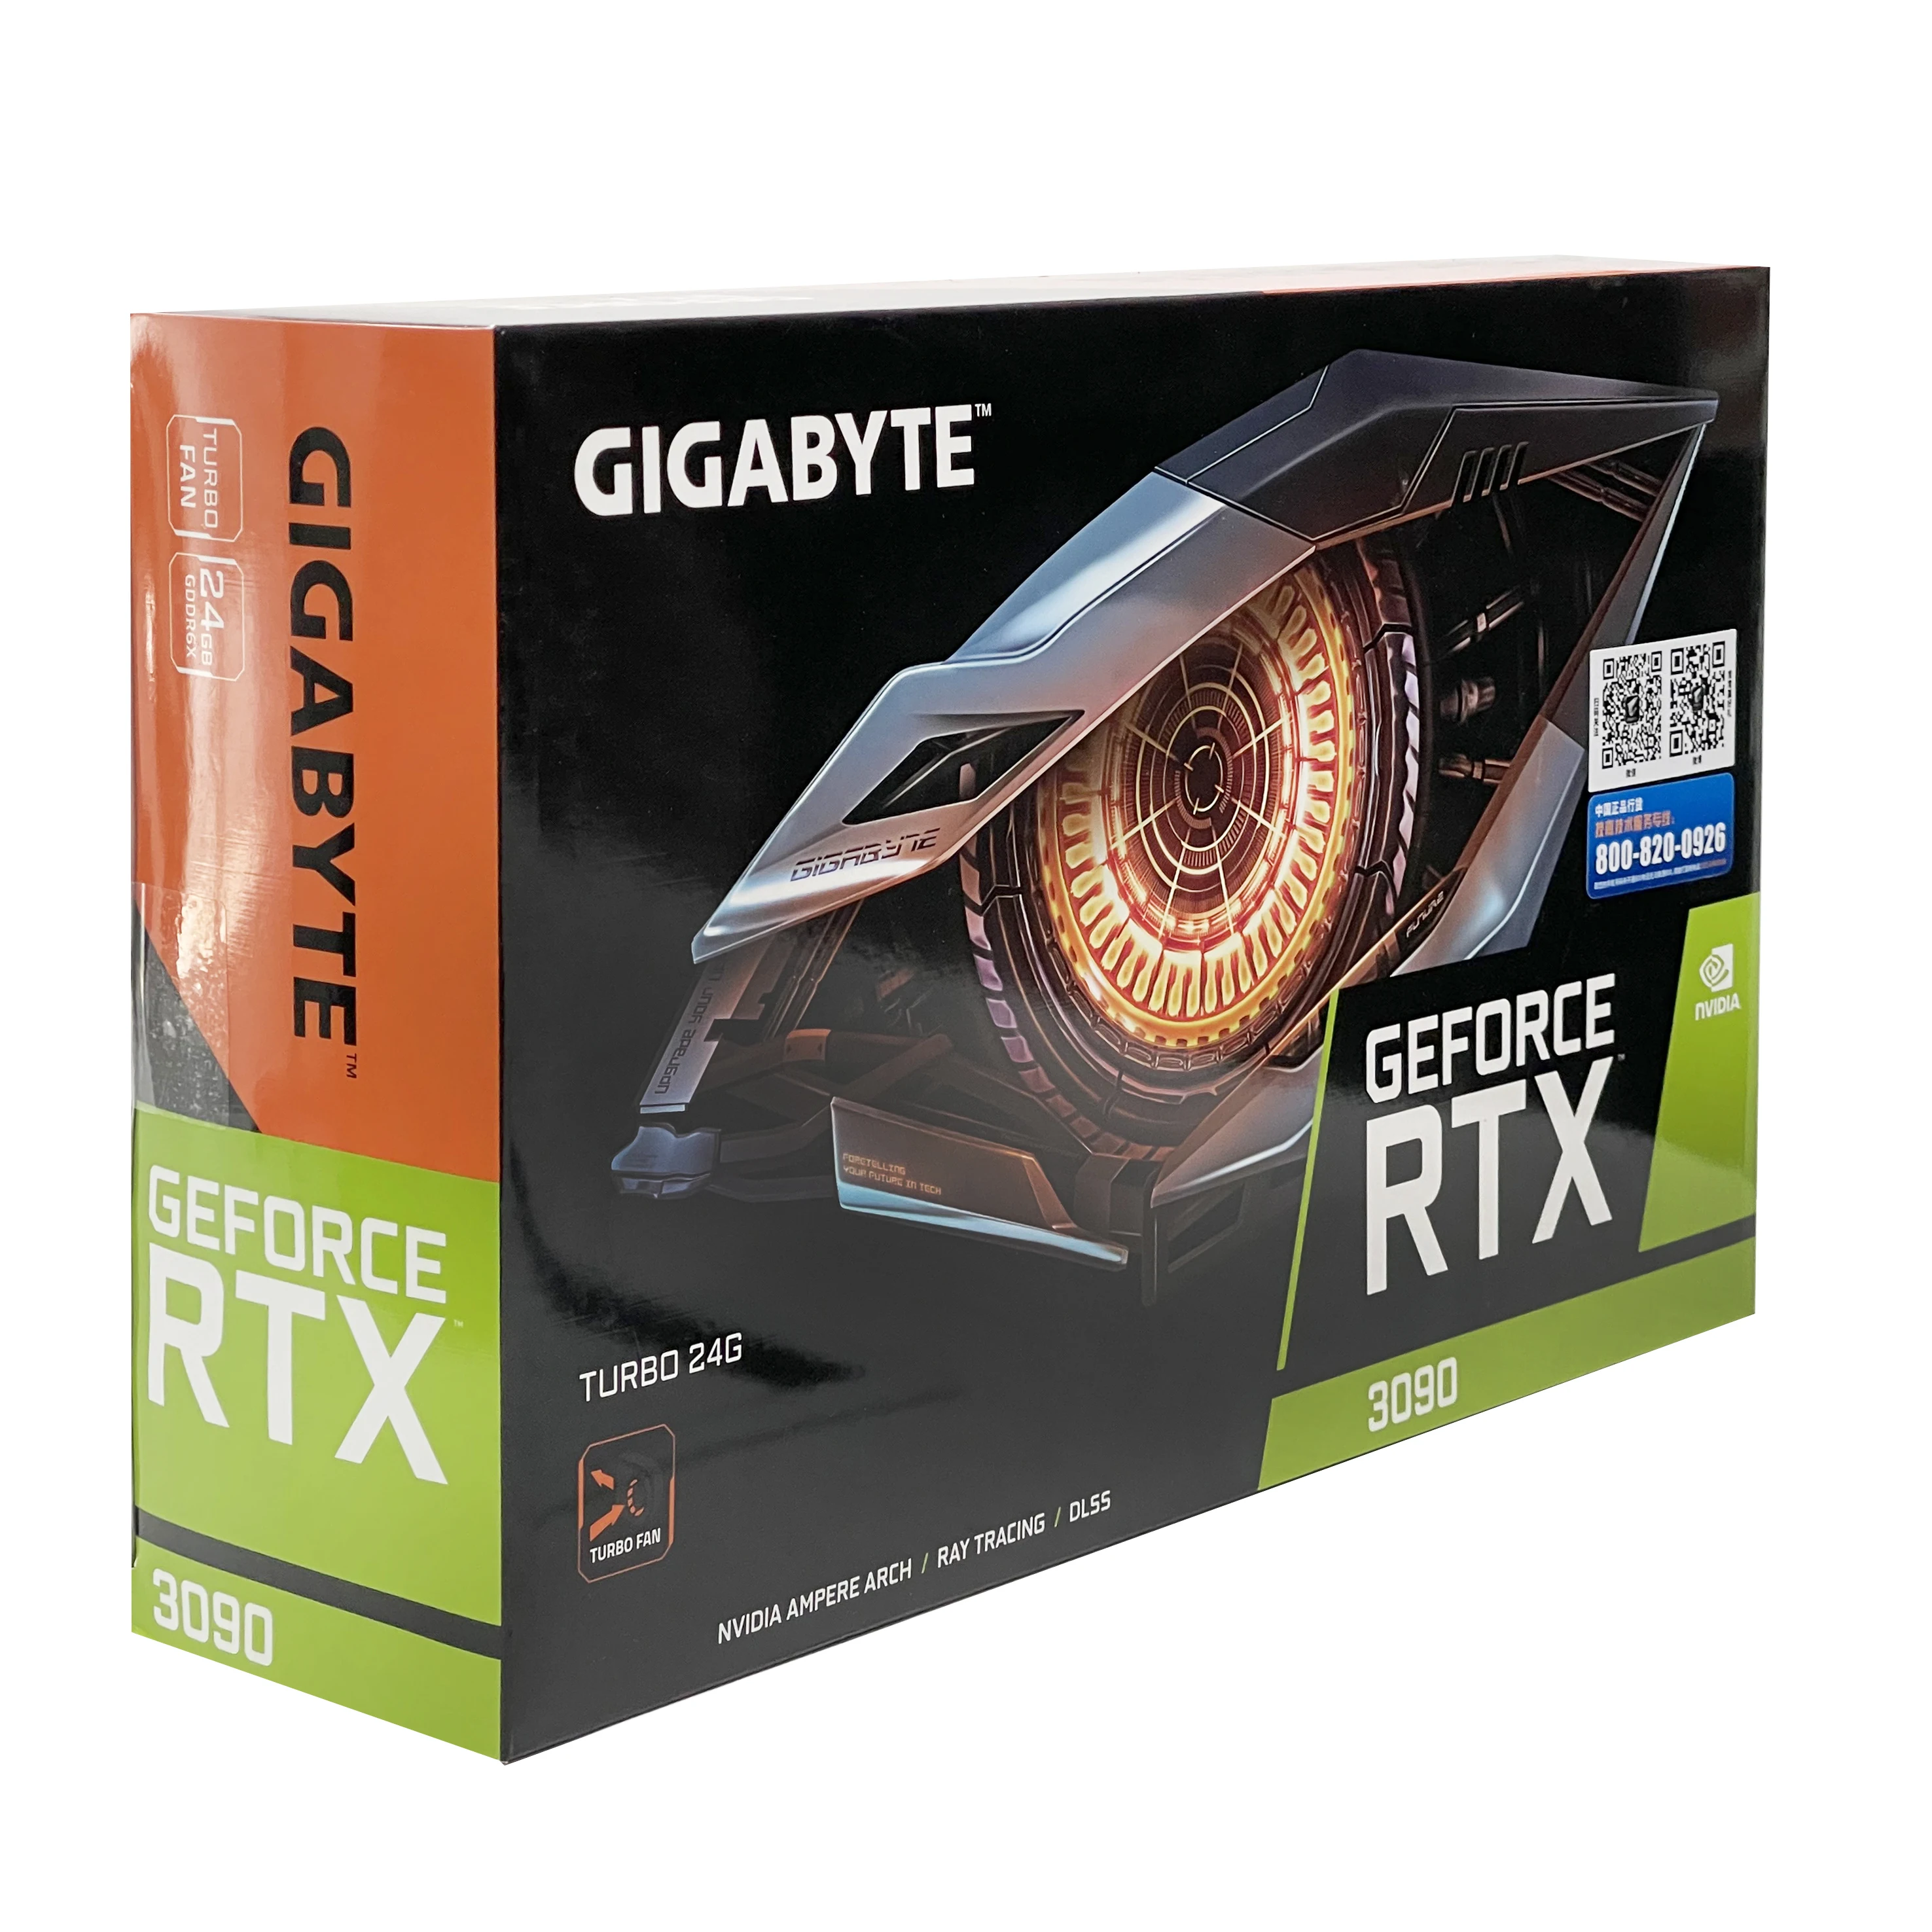 Nvidia Geforce Rtx 3090 Graphics Cards Gpu Video Card Rtx3090 For Gaming  Graphics Card 24gb Gddr6x - Buy Nvidia Rtx 3090,Graphics Card,Video Card  3090 Product on Alibaba.com